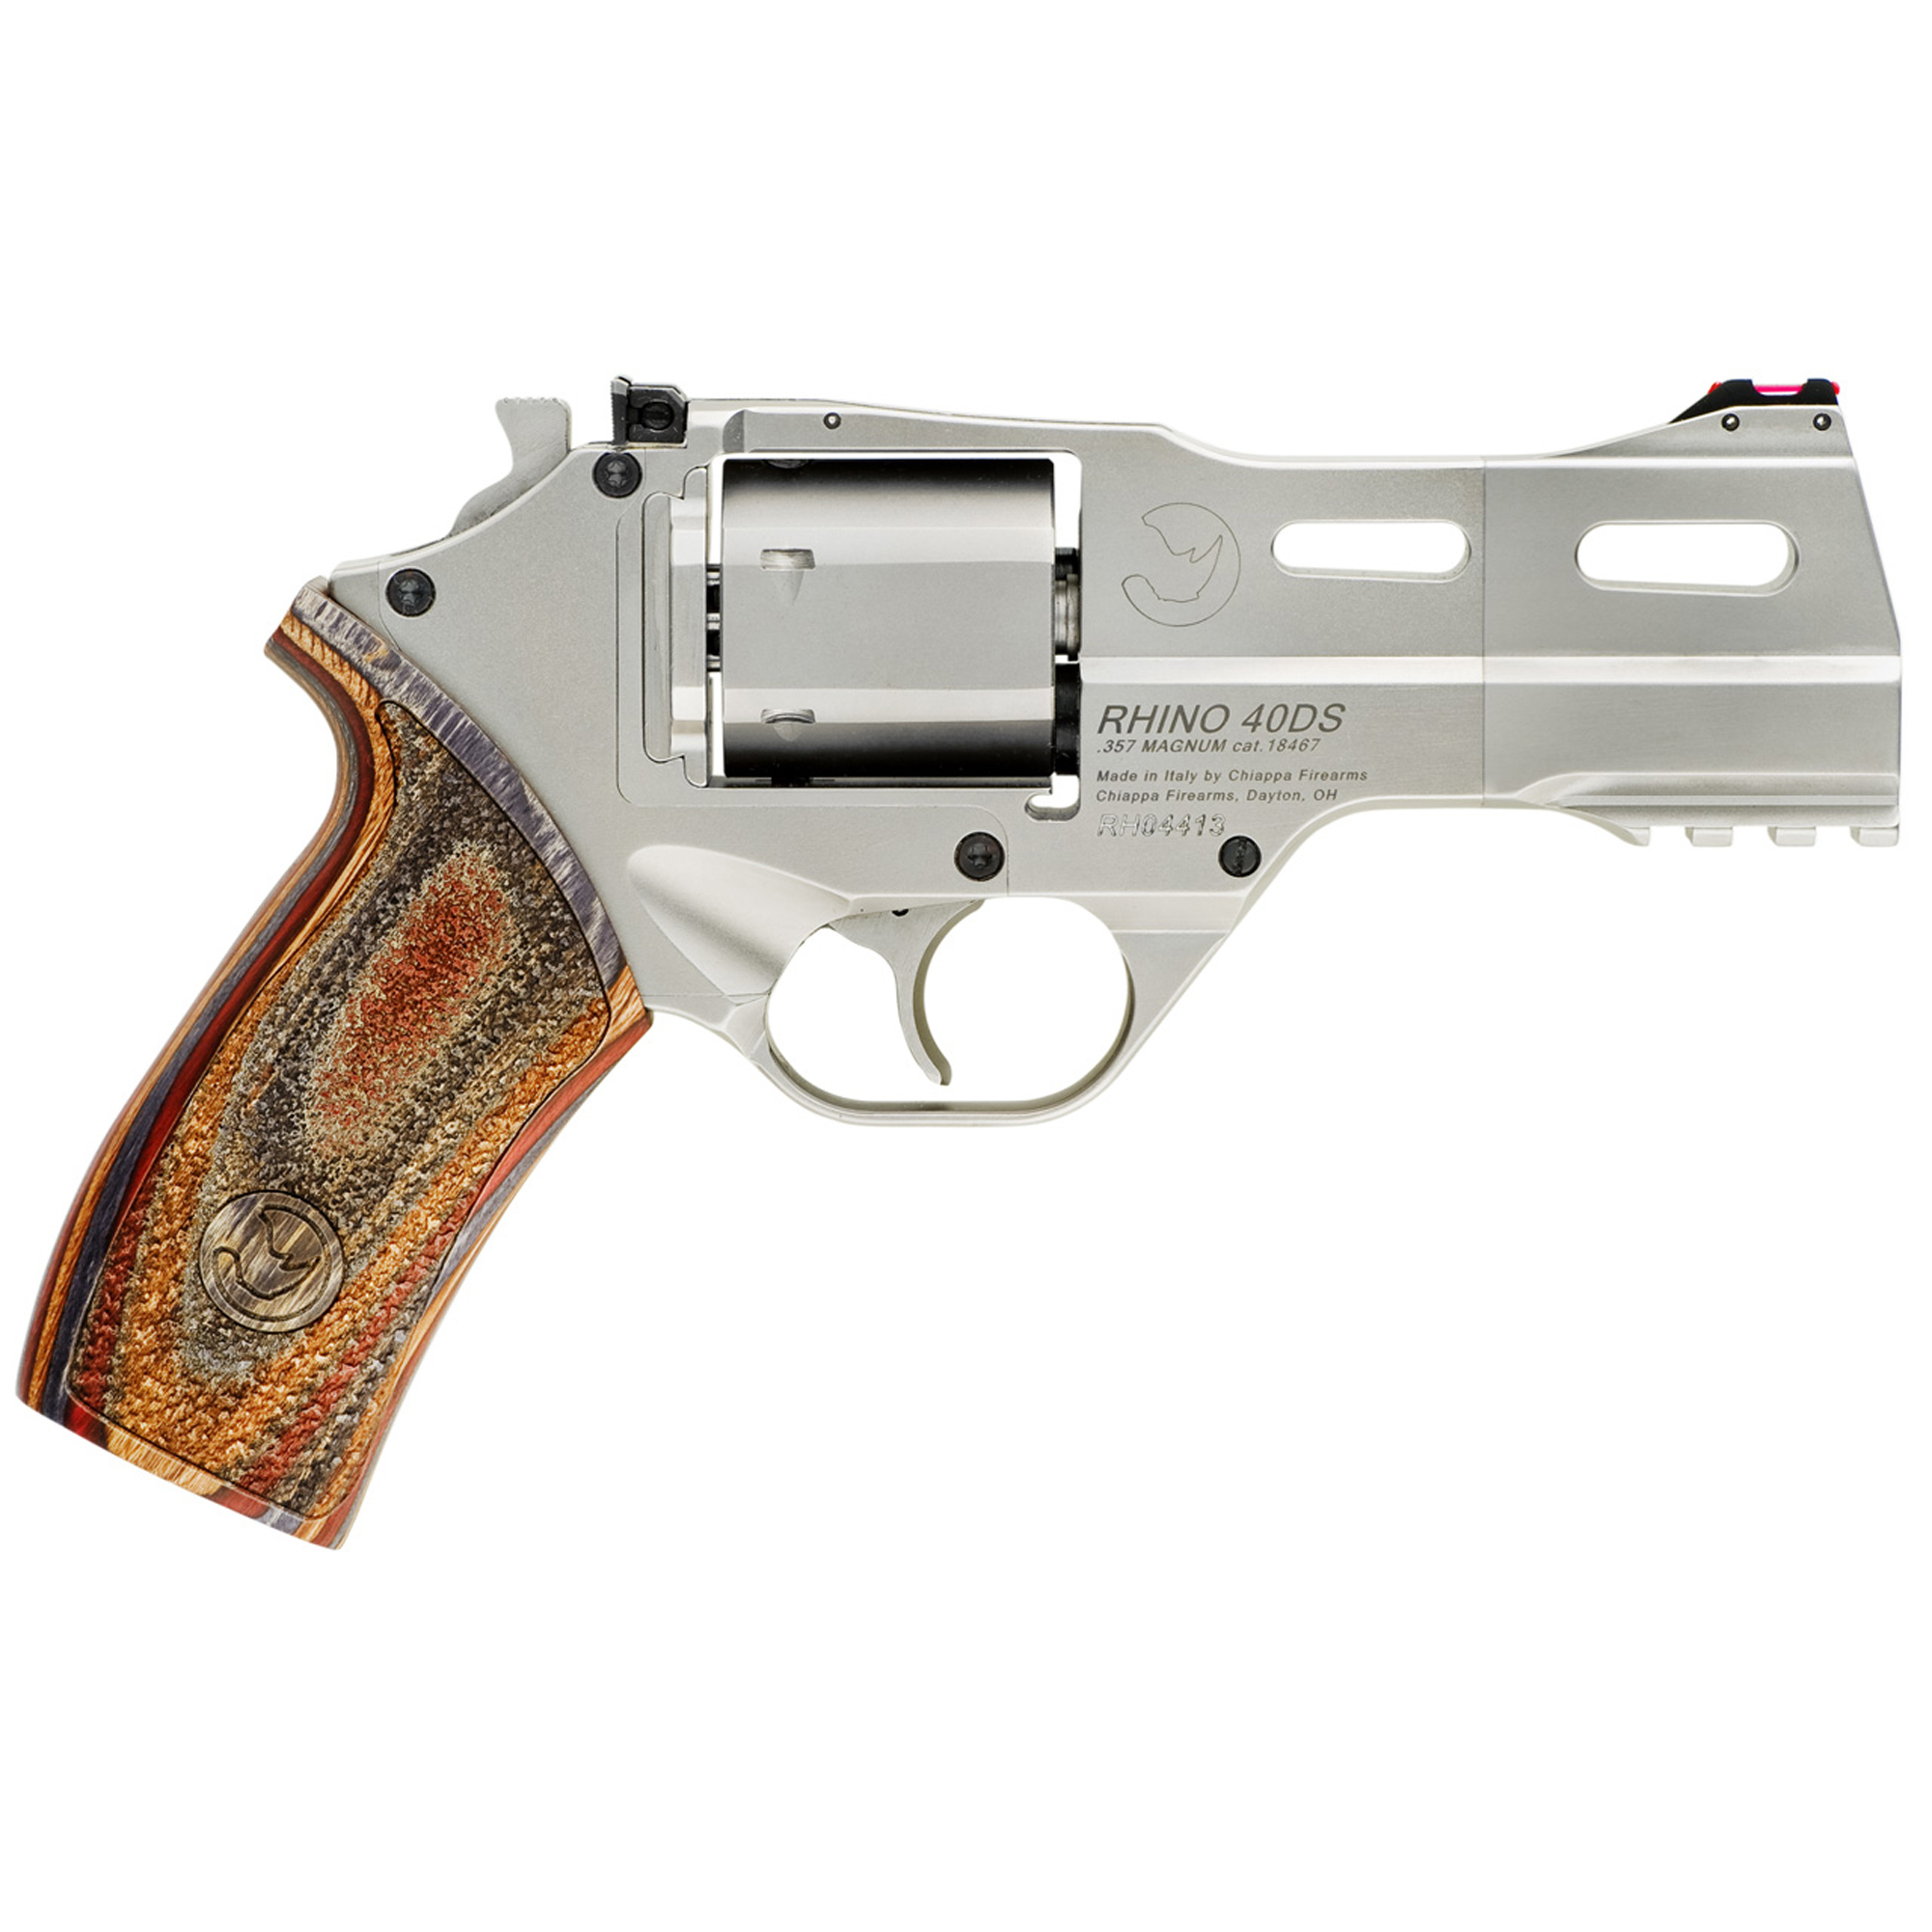 Chiappa Firearms, Rhino 40DS Revolver, Double Action/Single Action, 357 Magnum/38 Special, 4" Barrel, Alloy, Nickel Finish, Walnut Grips, Fiber Optic Front Sight, Adjustable Rear Sight, 6 Rounds, 3 Moon Clips